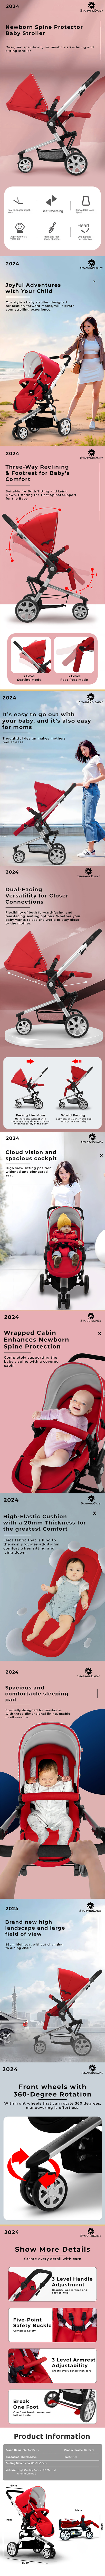 Sleek and Stylish Best Stroller for Baby in India